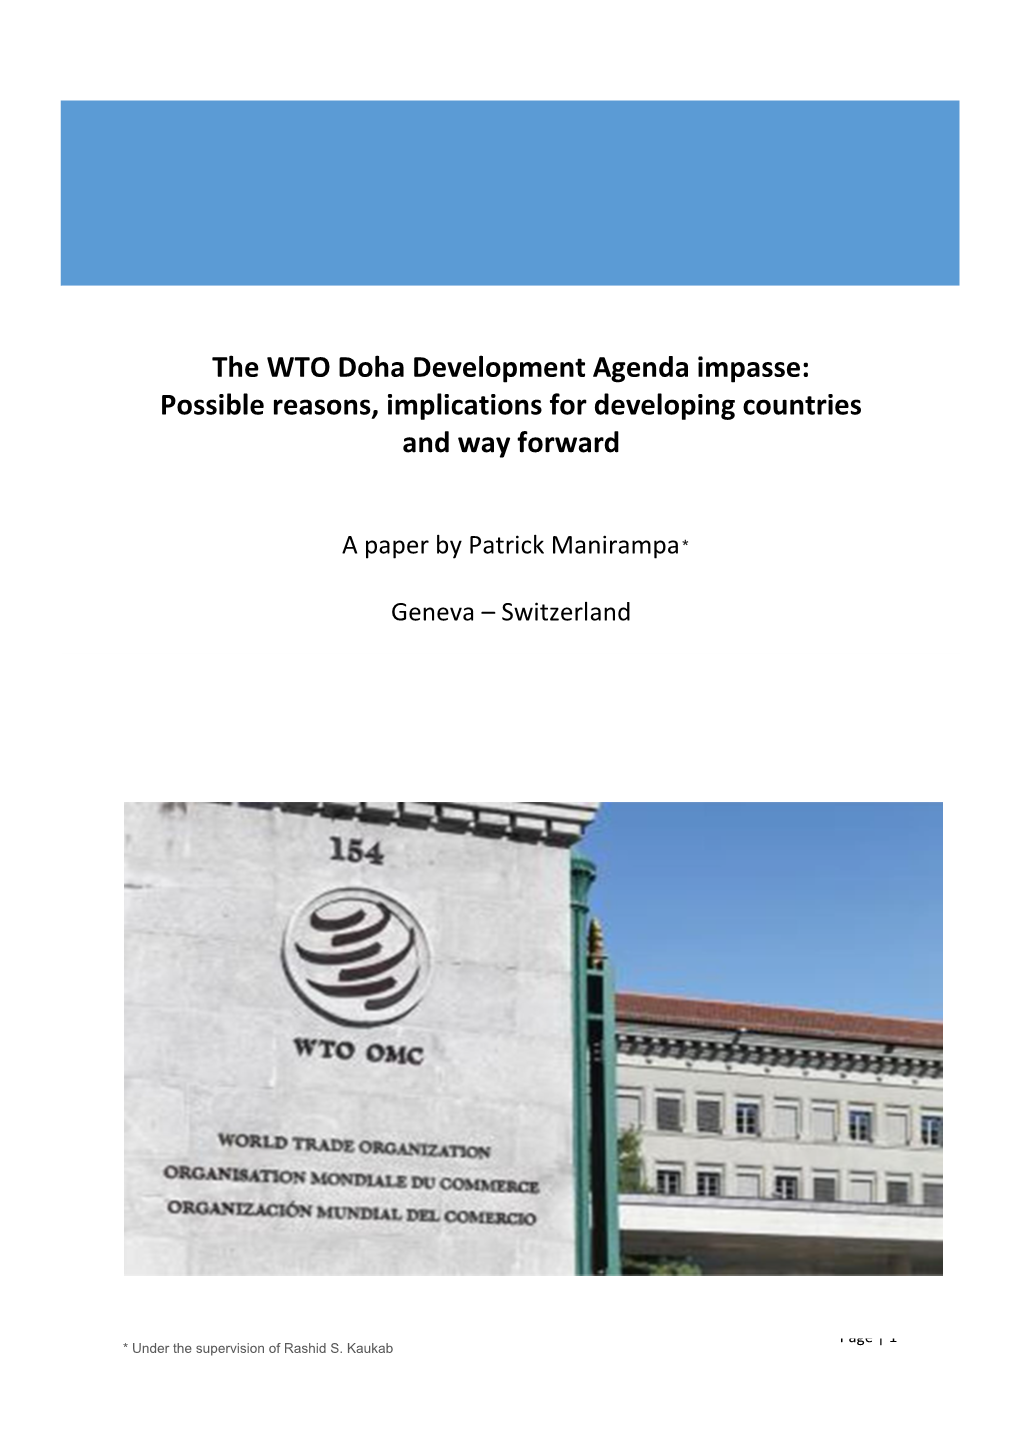 The WTO Doha Development Agenda Impasse: Possible Reasons, Implications for Developing Countries and Way Forward